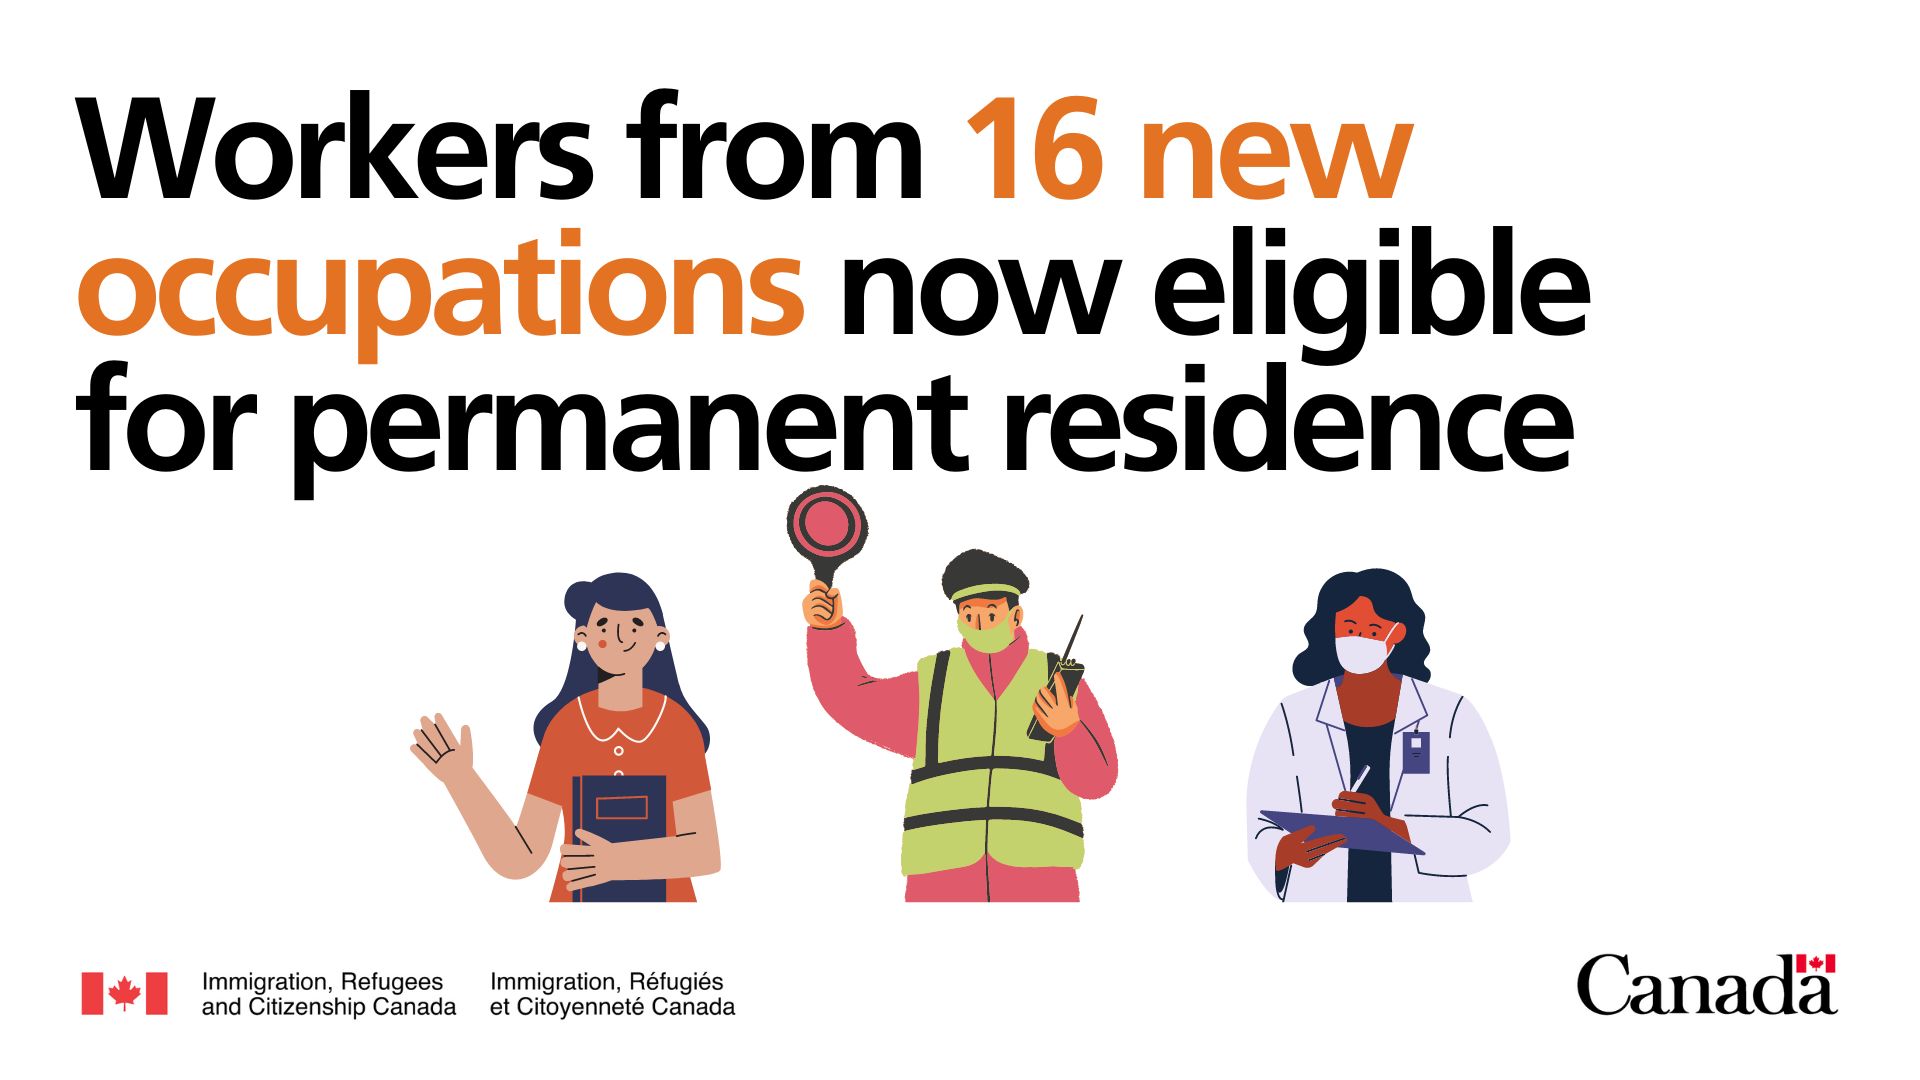 Foreign workers from 16 new occupations are now eligible for permanent residence in Canada